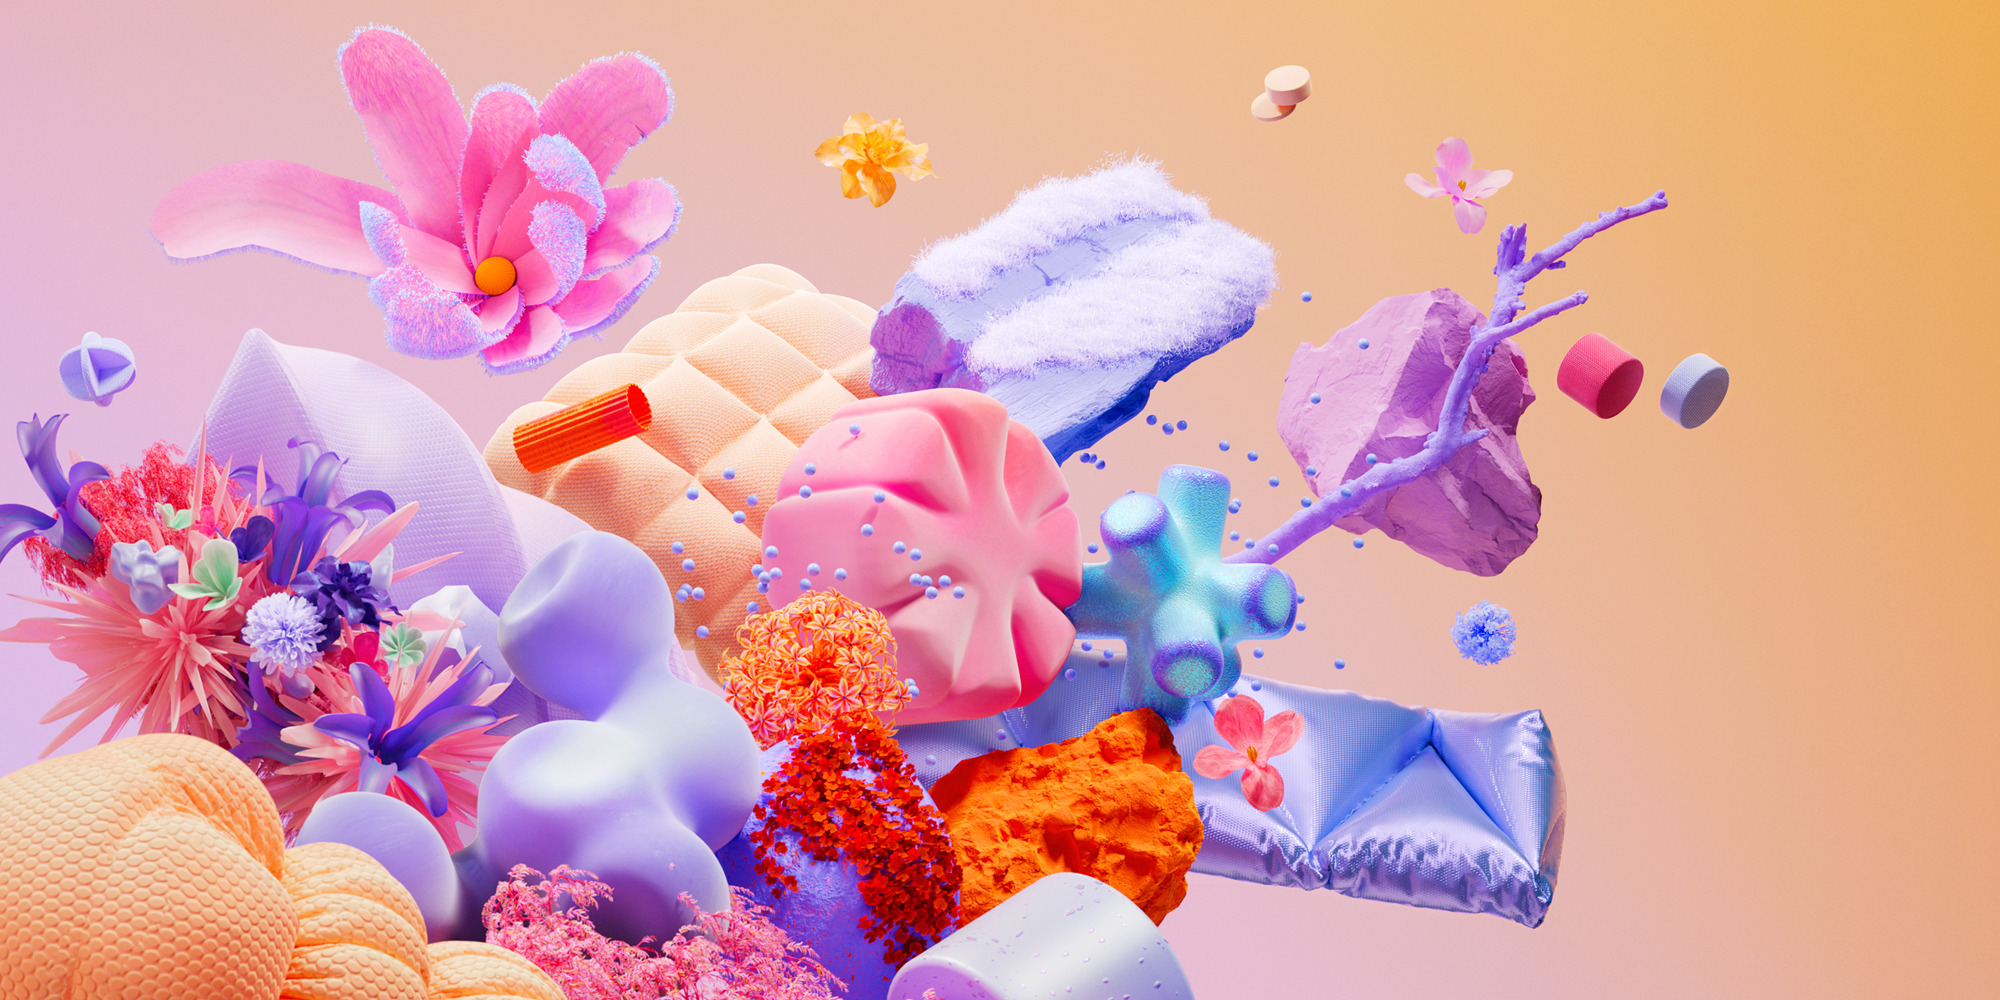 pastel orange and pink background with colorful sea world objects in different colors